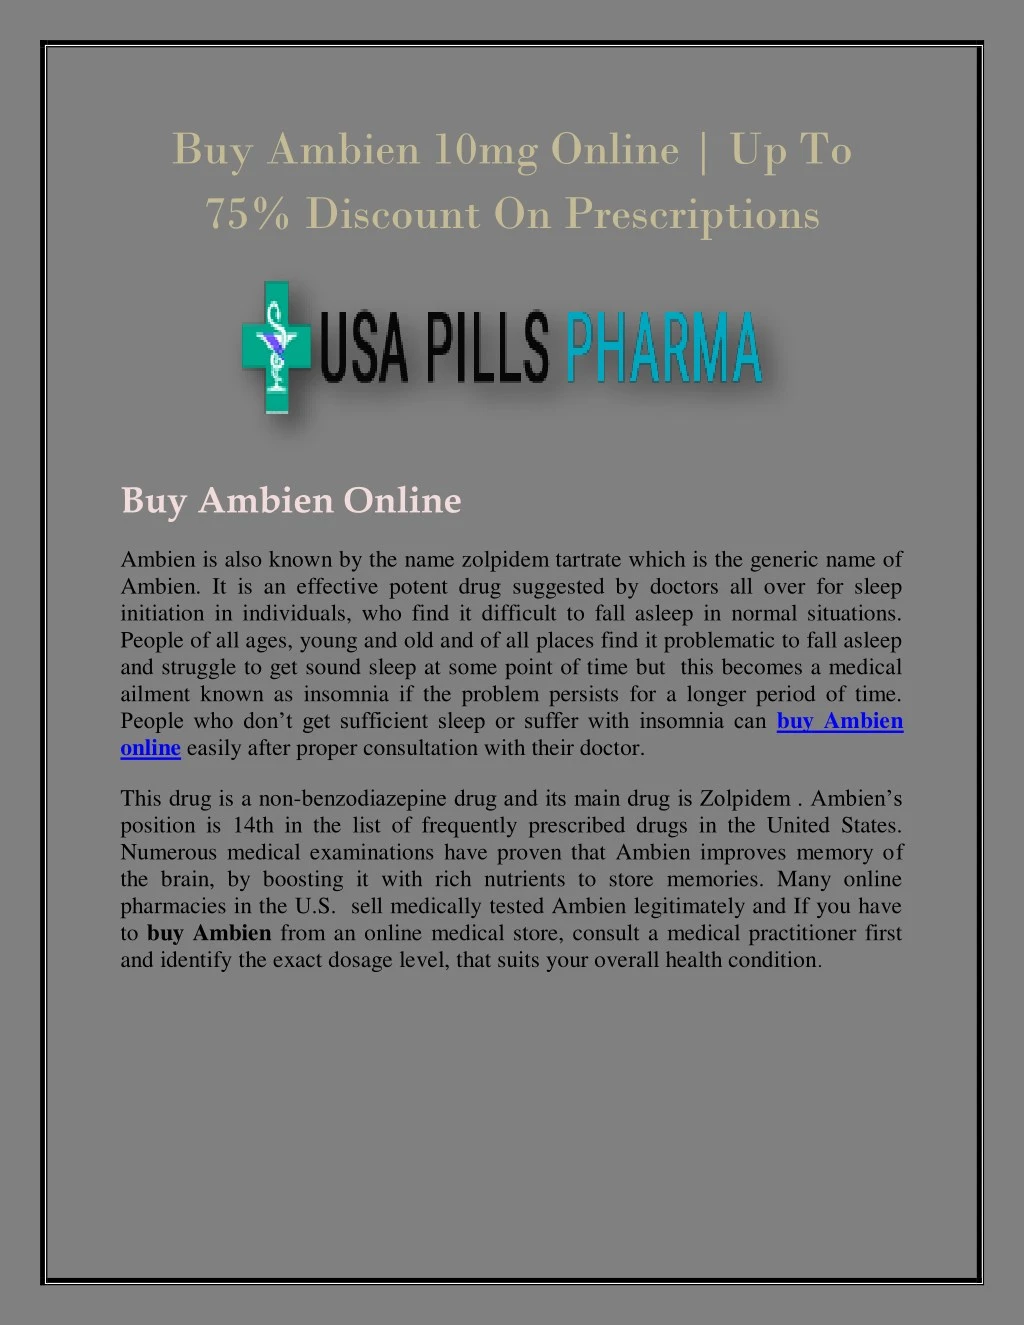 buy ambien 10mg online up to 75 discount